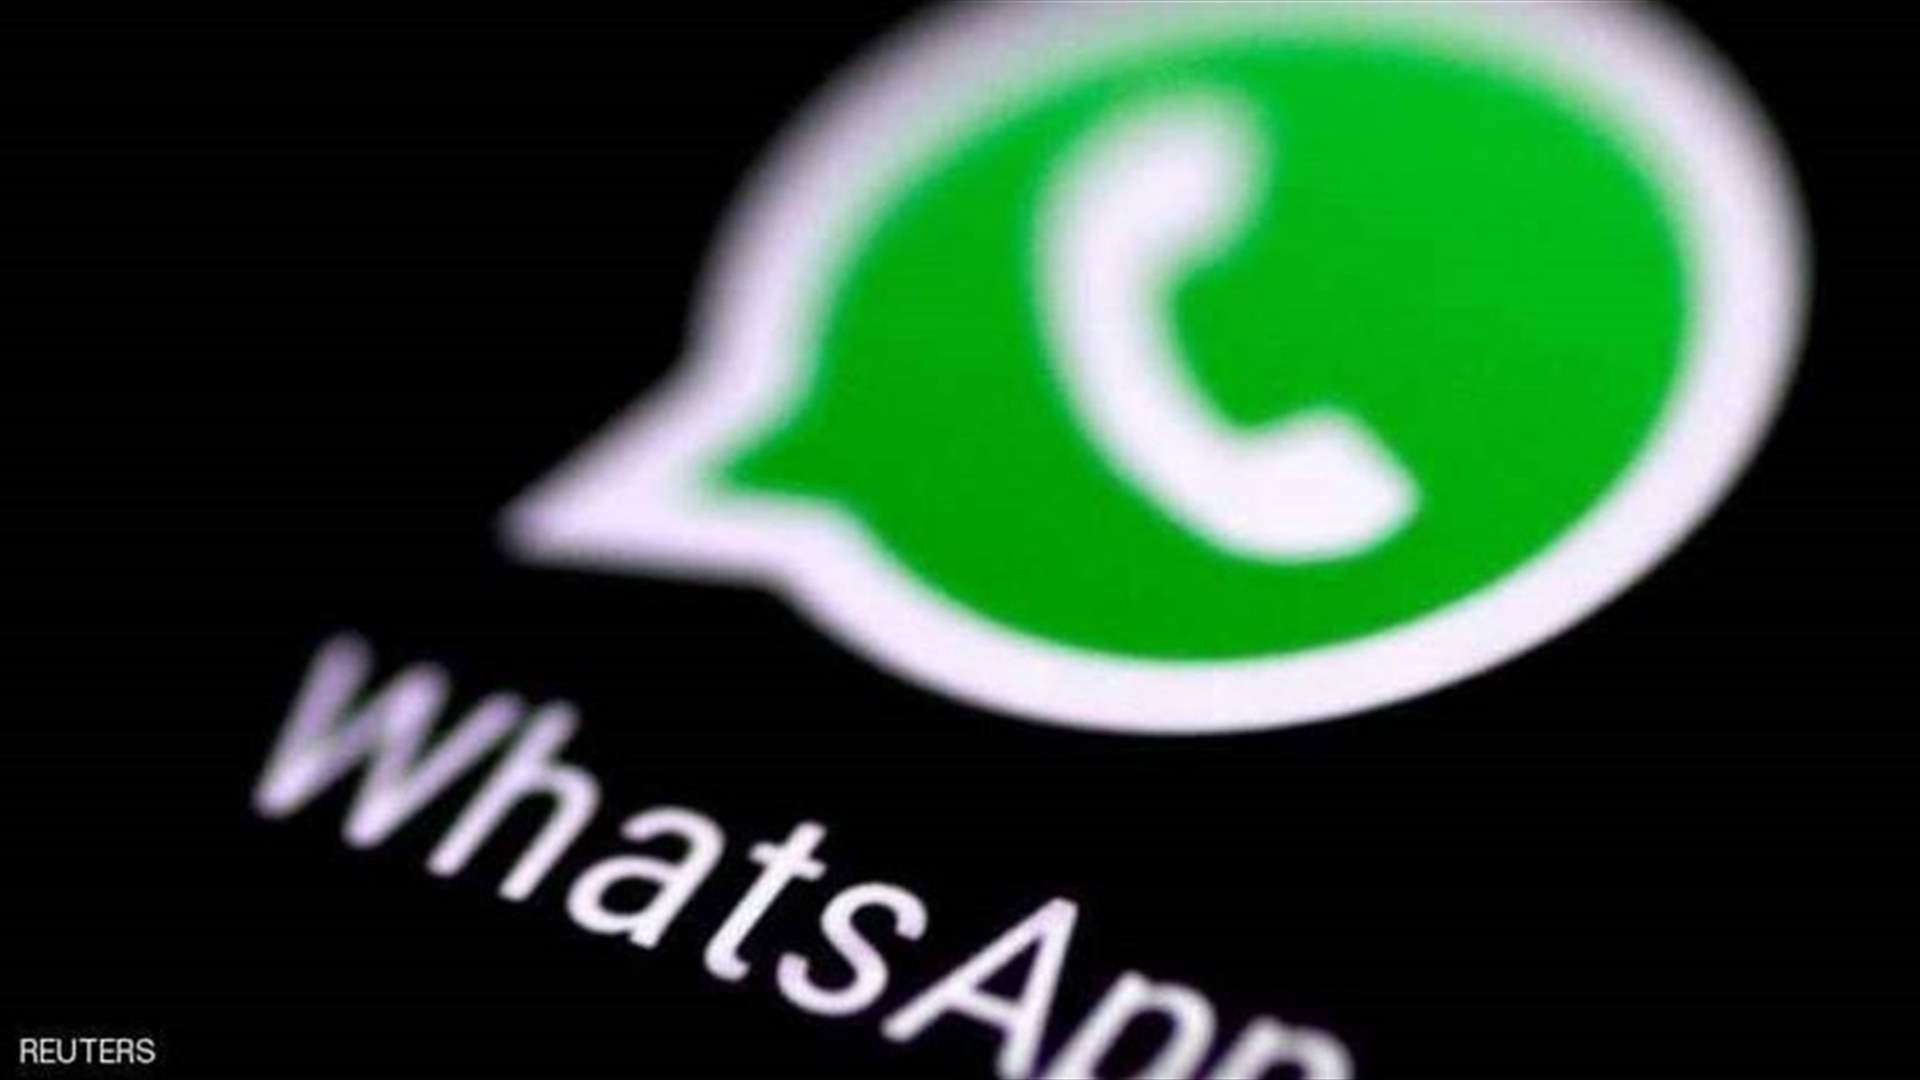 WhatsApp urges users to upgrade app after security breach